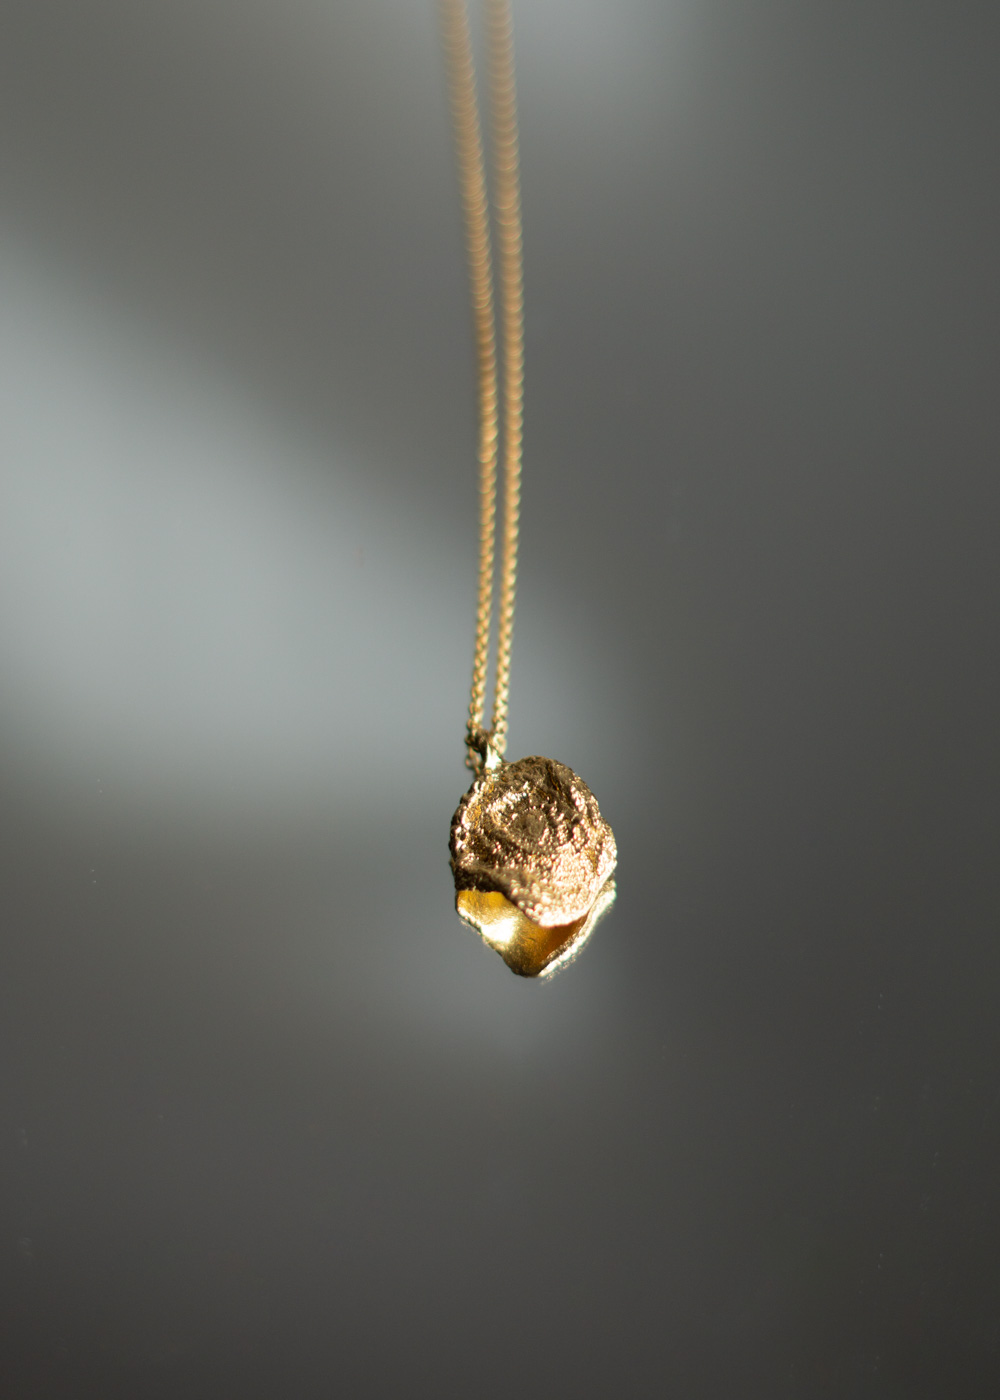 Atlas krig Vejrtrækning Jewelry That Tells a Story ~ Slowly Crafted by Maria Sørensen — RG Daily